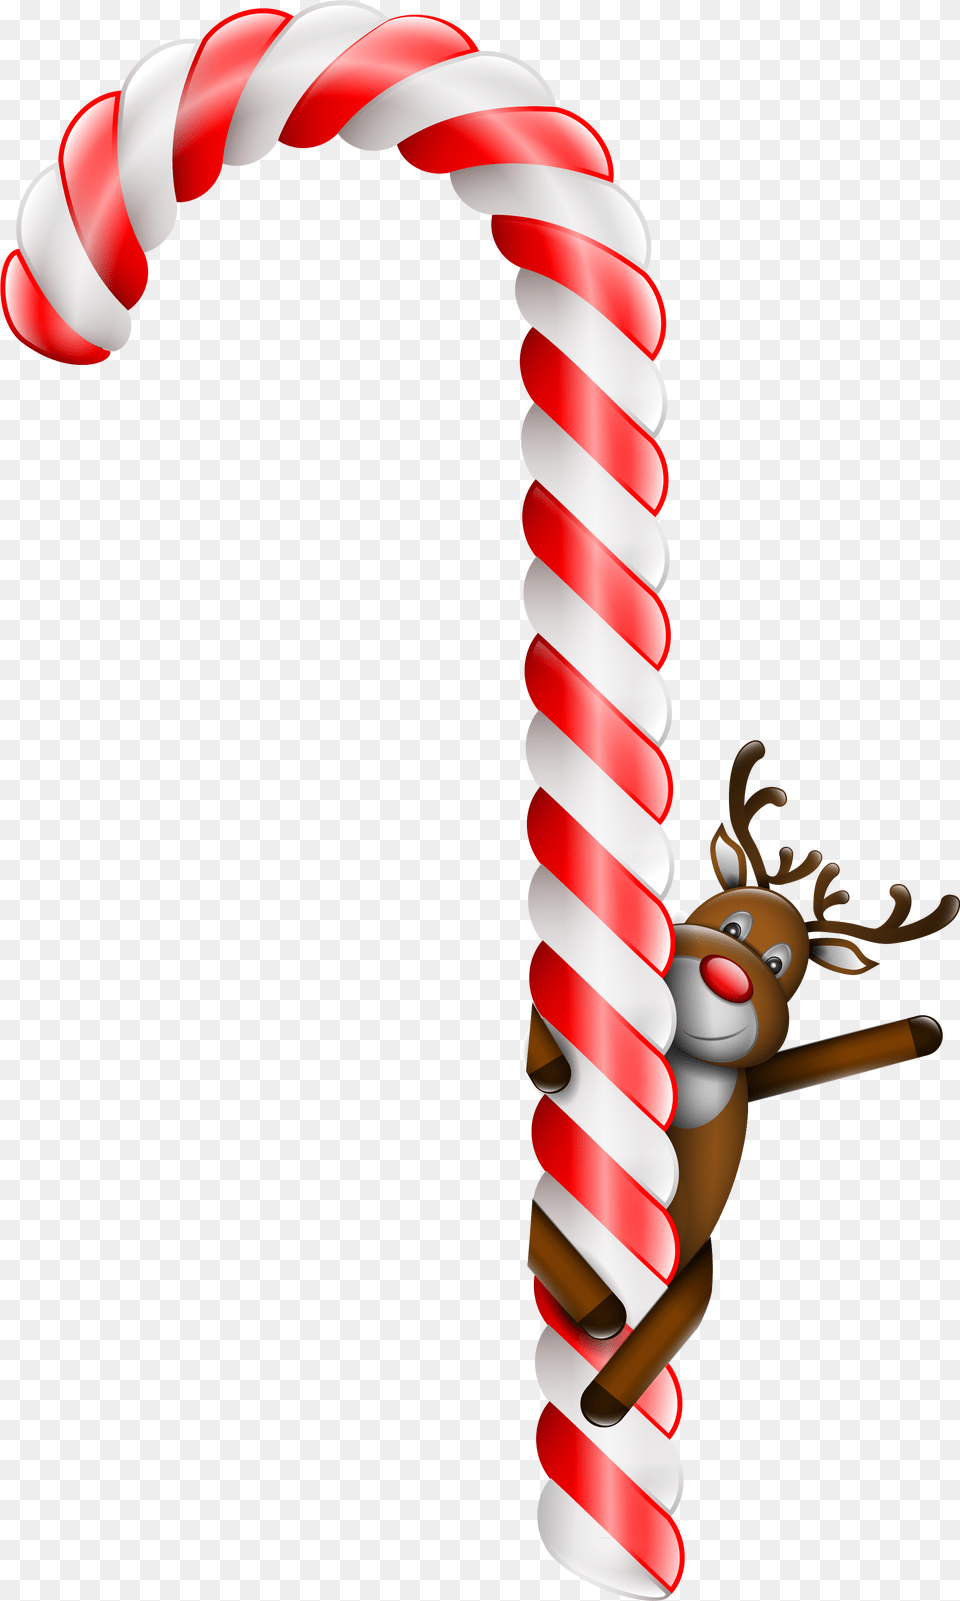 Free Candy Cane Clipart Transparent Christmas Candy Cane Transparent Background, Food, Sweets, Dynamite, Weapon Png Image